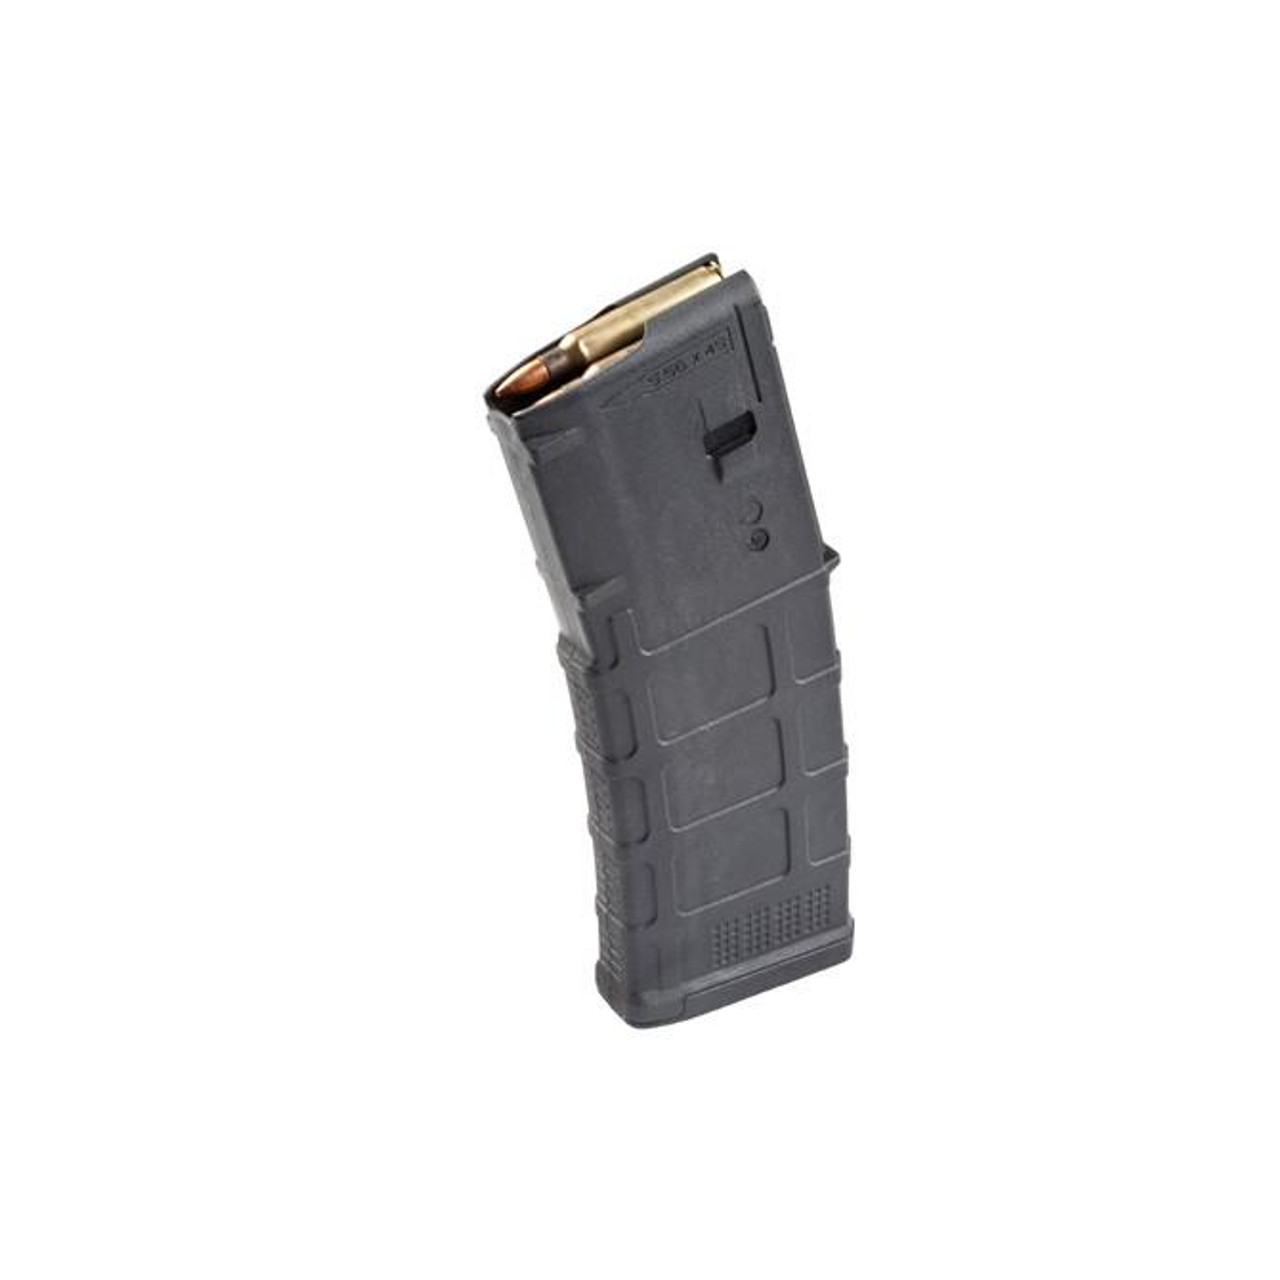 MAGPUL GEN M3 30 Round PMAG .223/5.56 AR-15 Magazine with Dust Cover